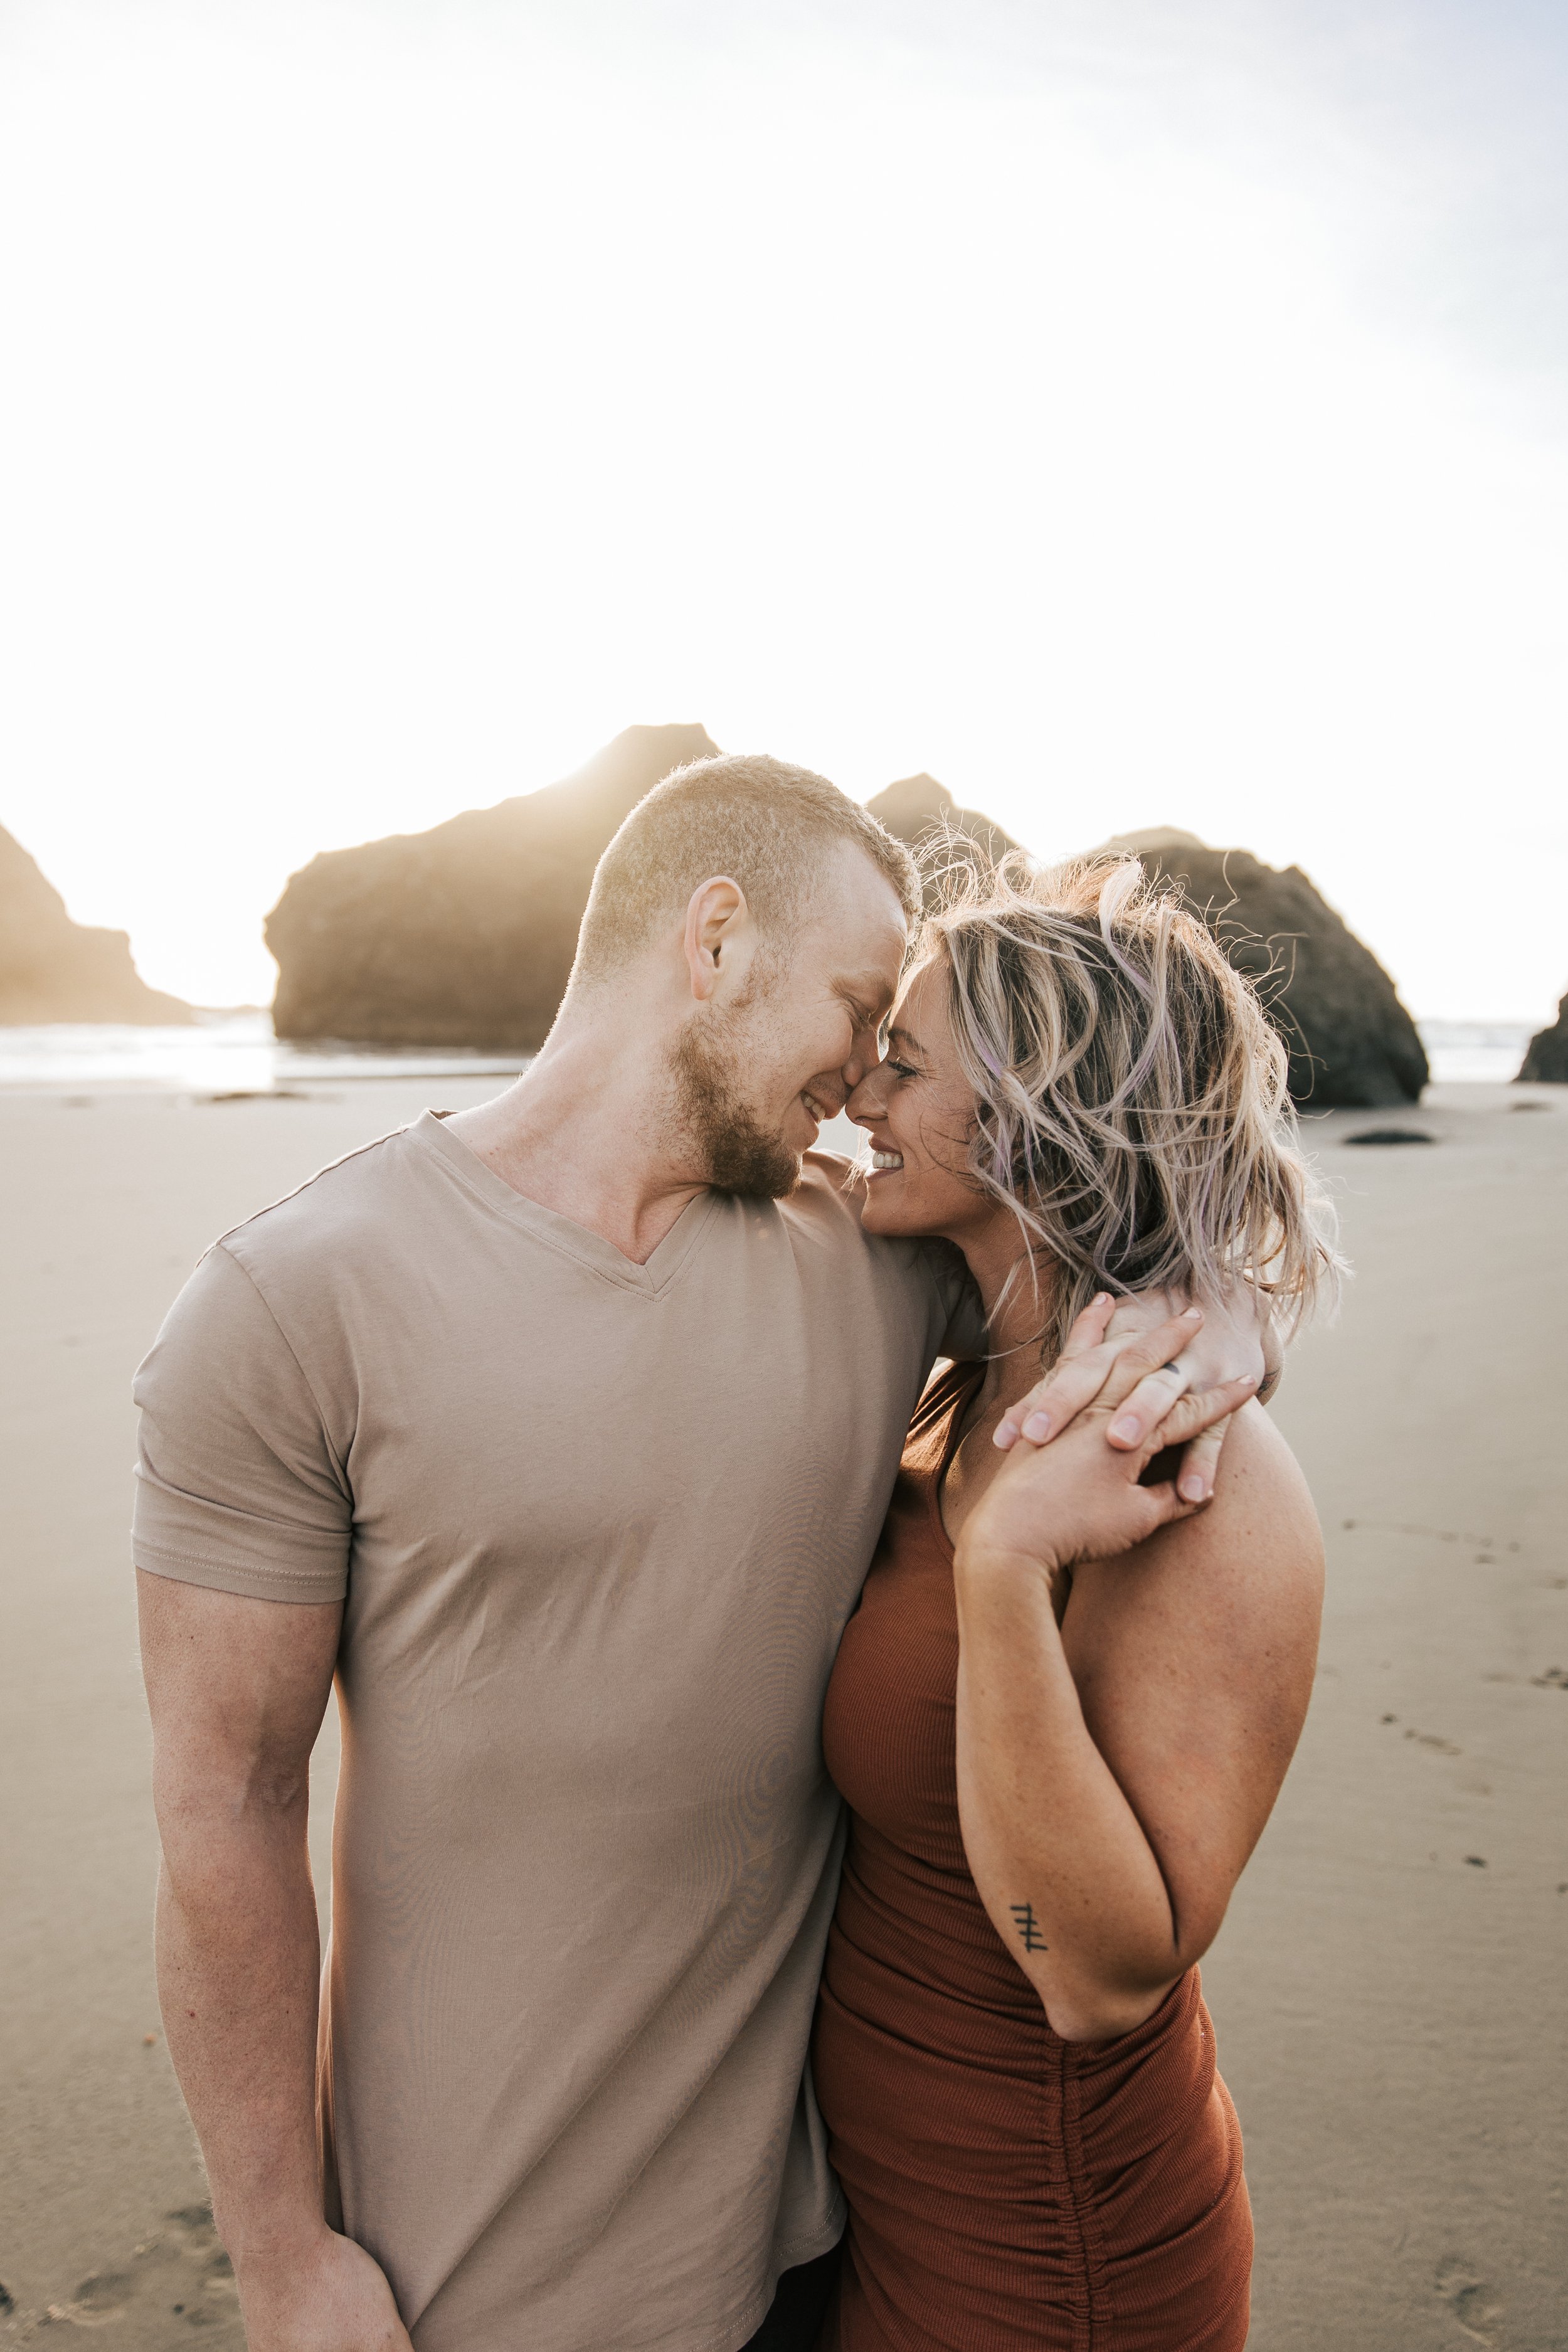  Brookings, Oregon engagement session. Couple hugs on the beach for a summer couples session on their anniversary. Husband and wife run around the beach with seastacks and rocks on the beach around them, barefoot in the sand.  